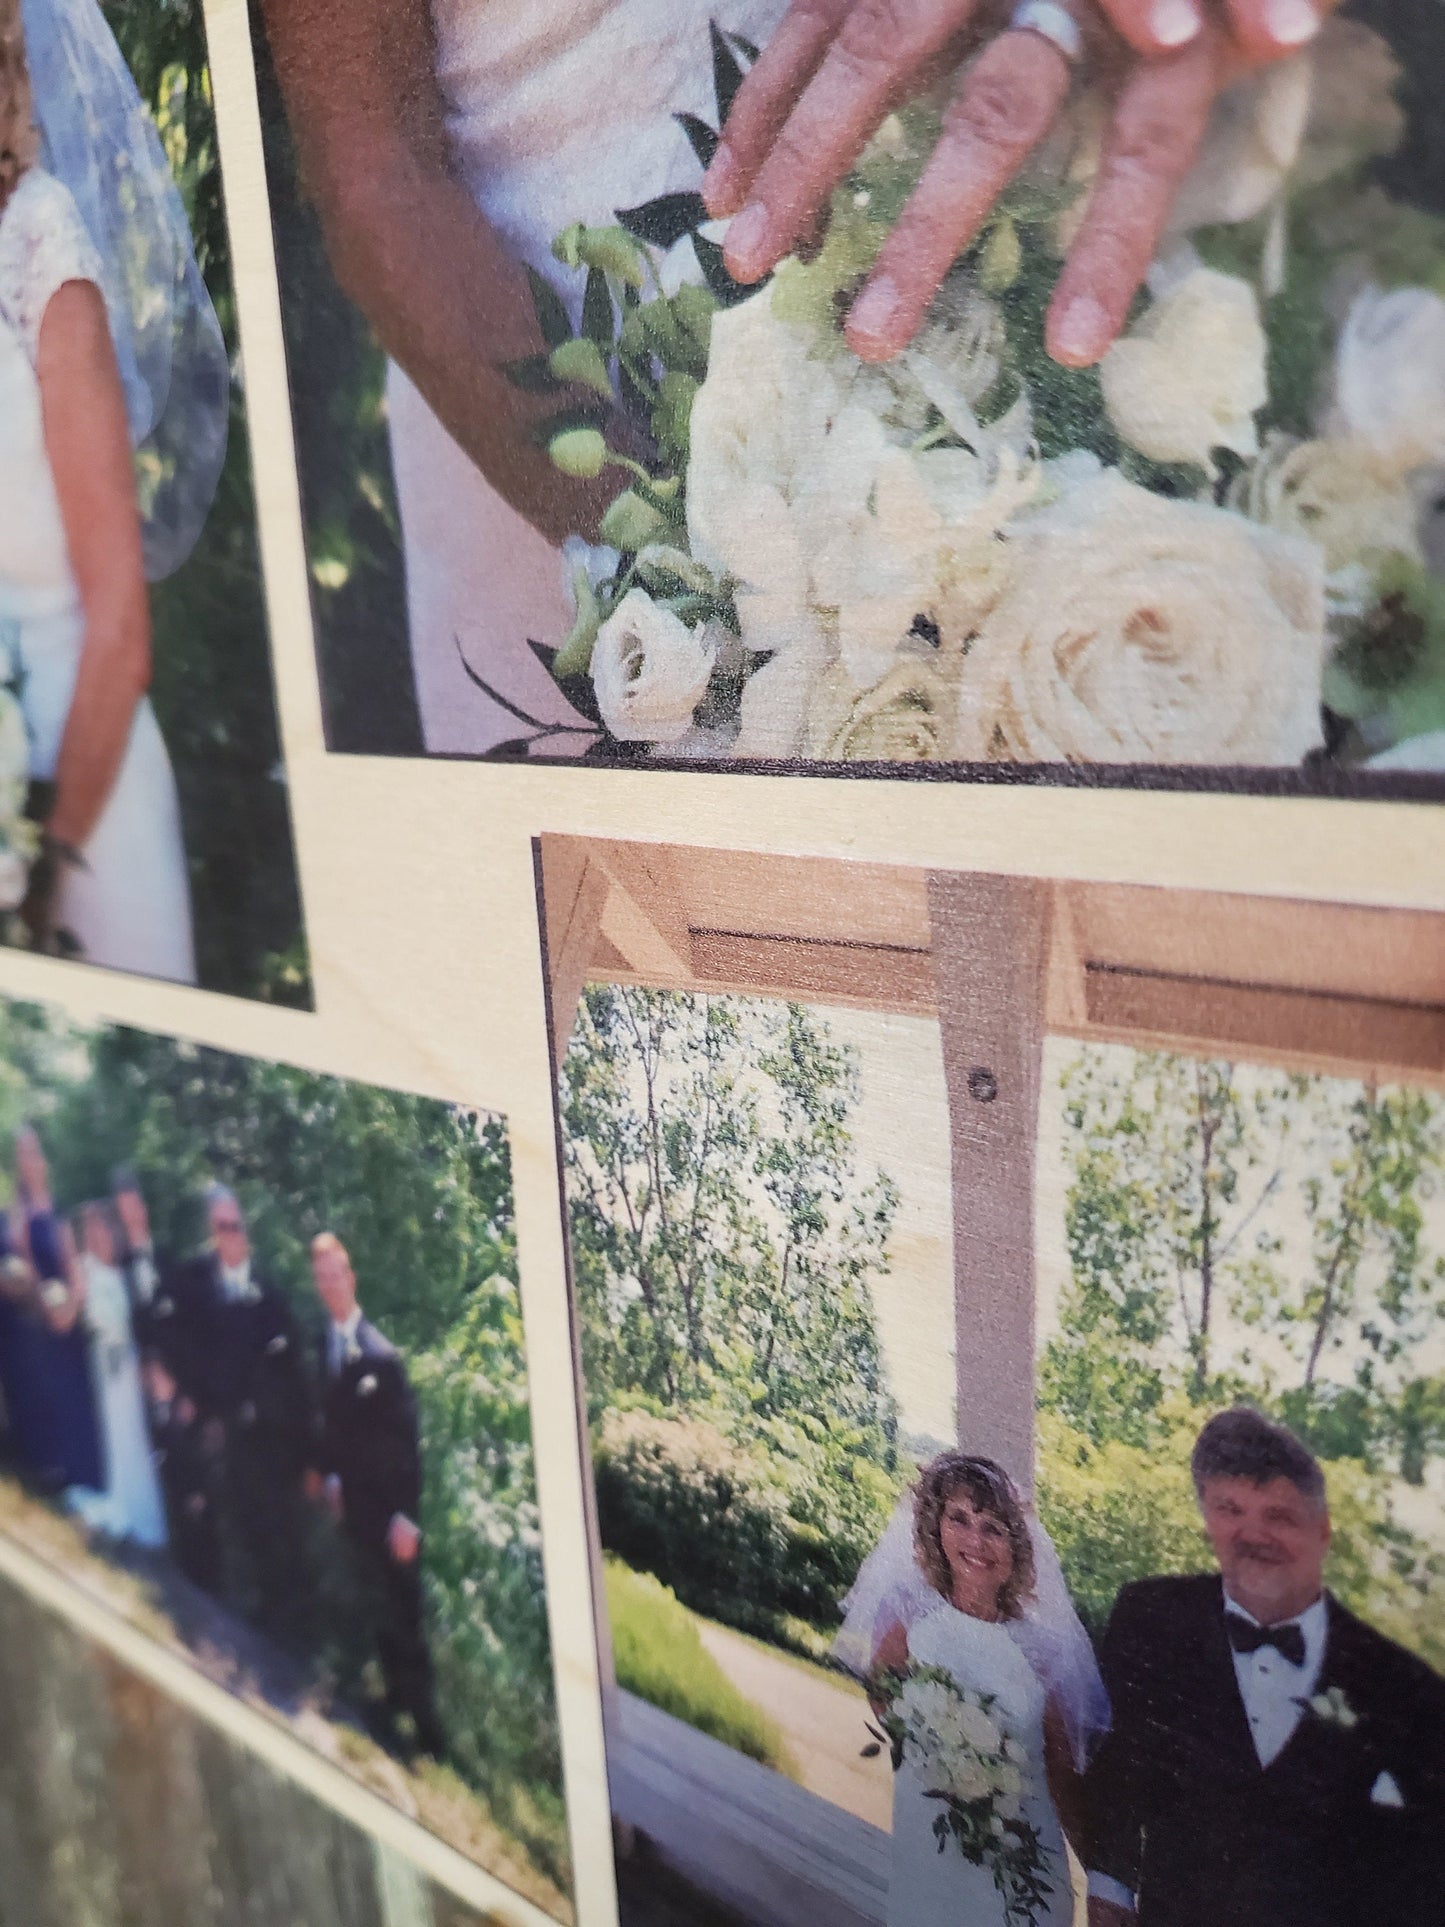 Diamond Collage Wedding Wood Square Custom Photo Square Wall Hanging Photo Picture Family Photos Printed Personalized Gift Home Decor USA